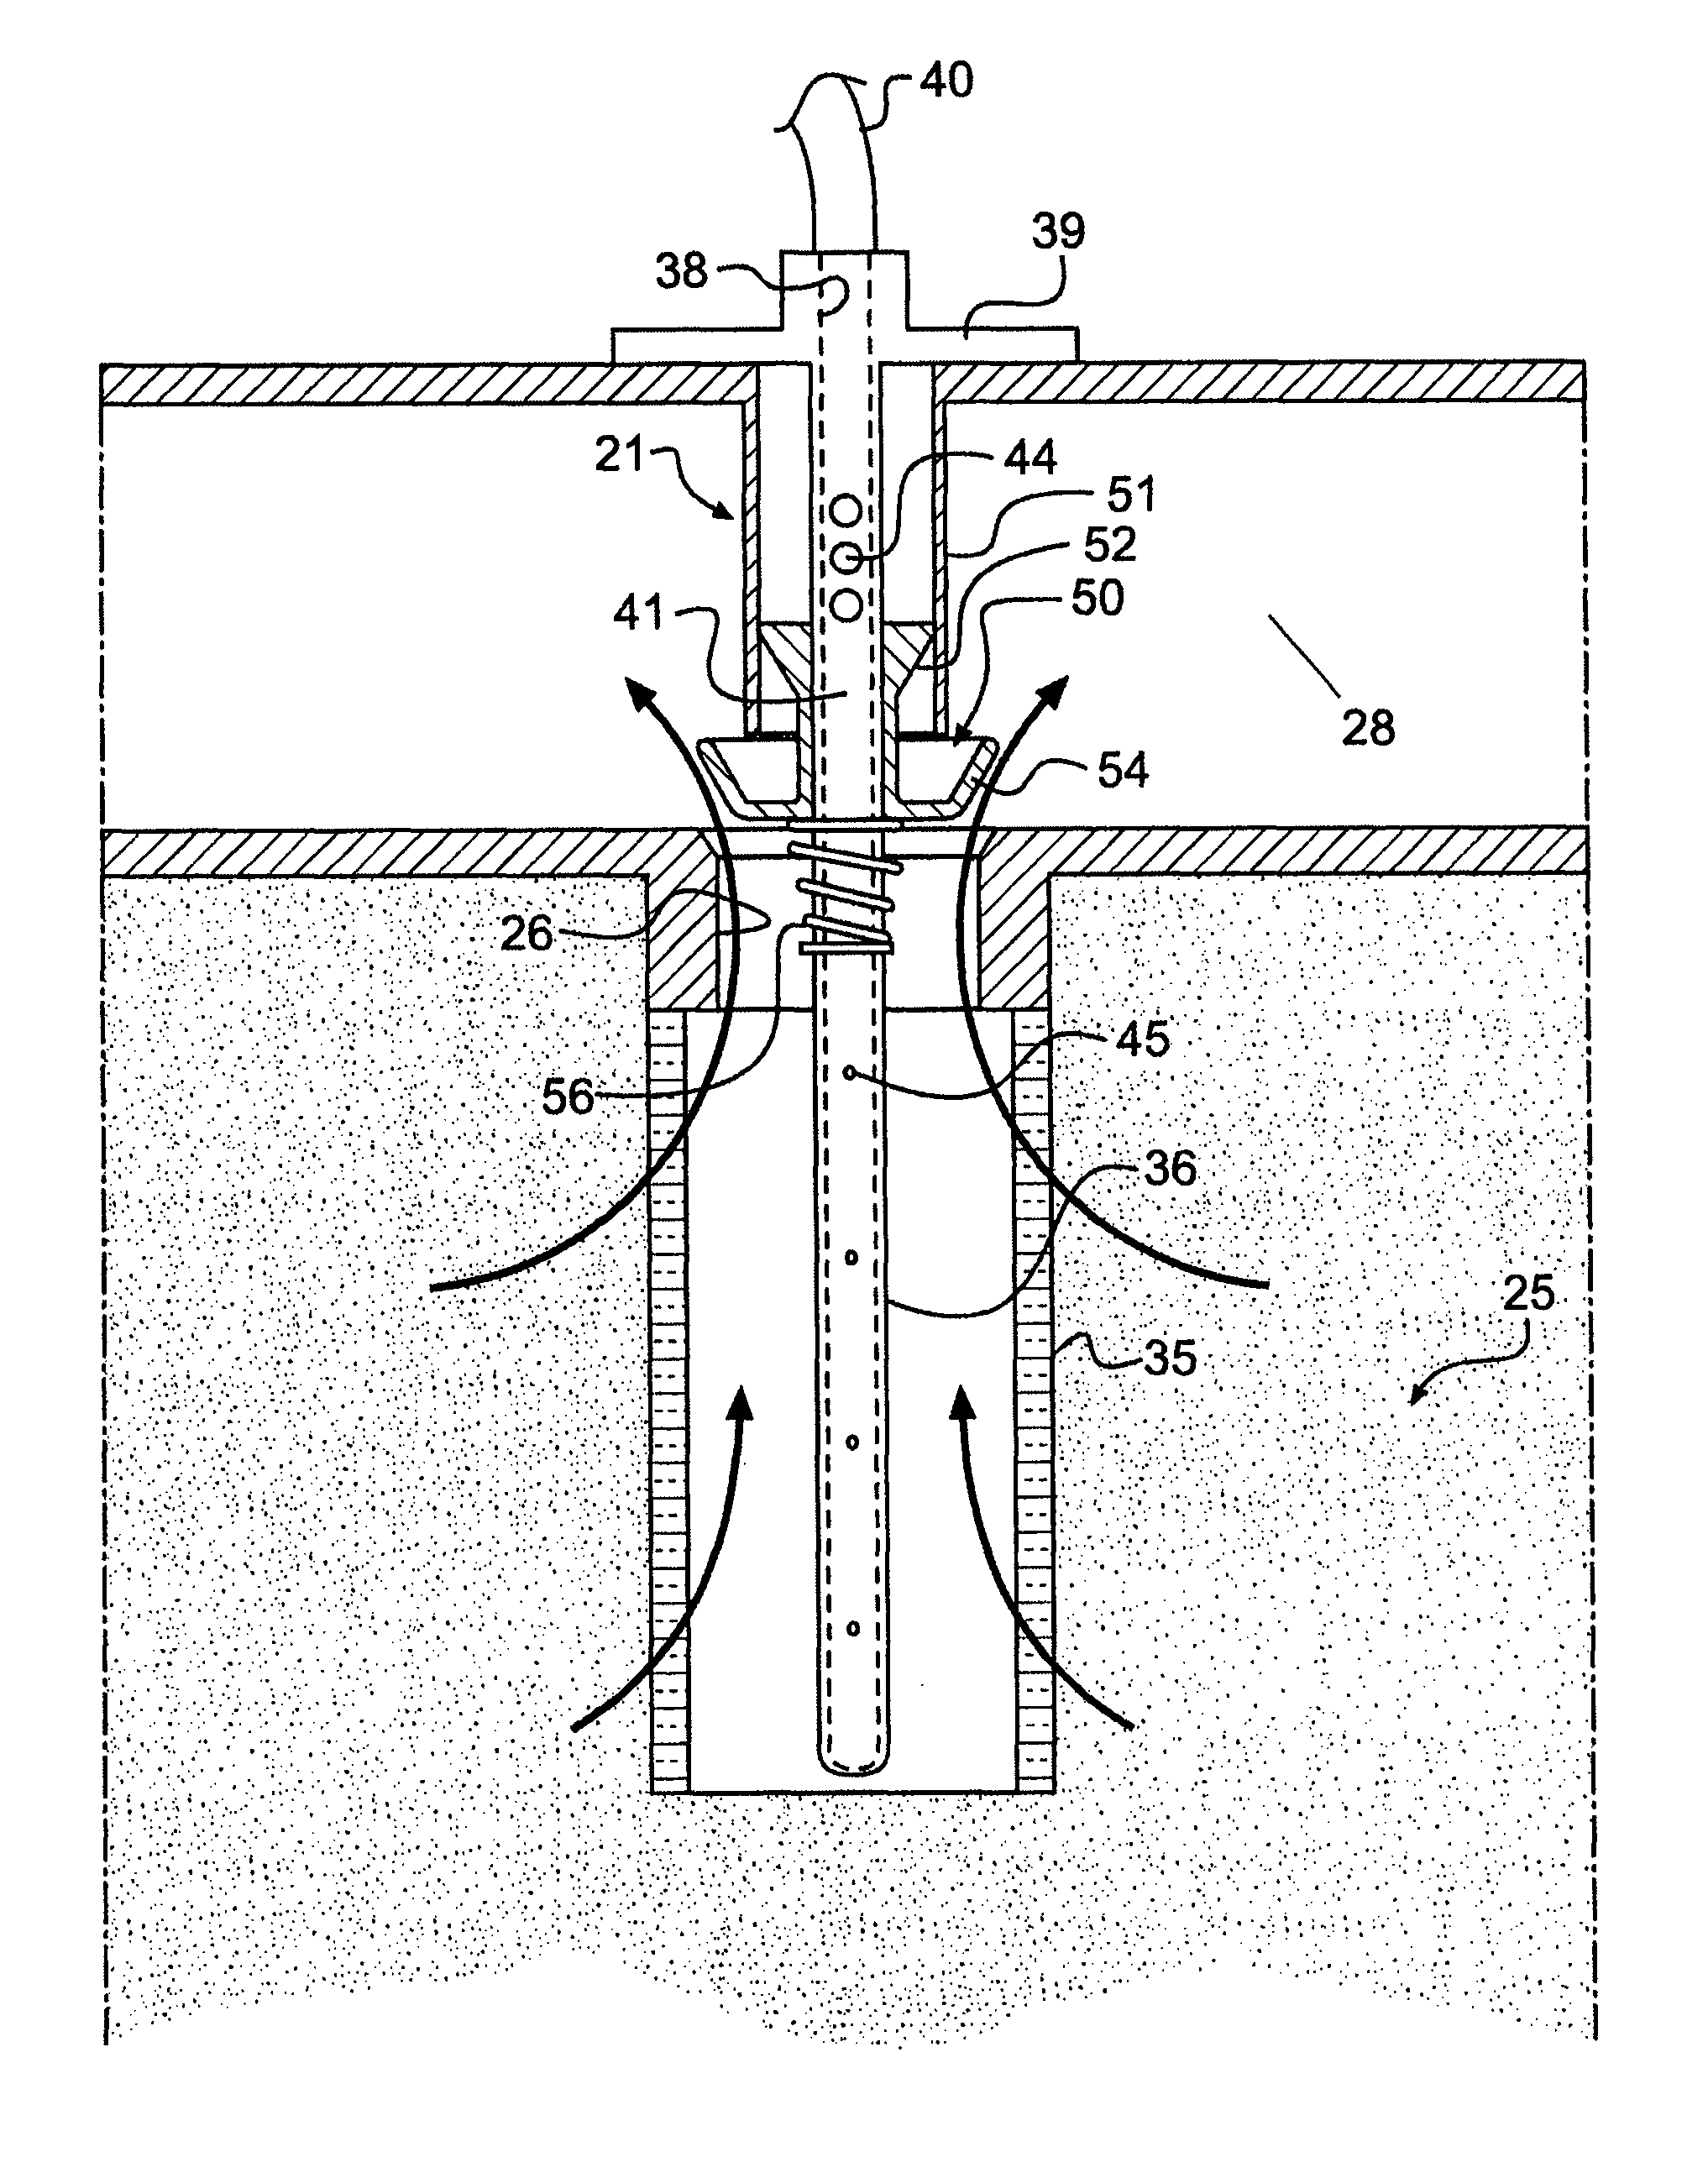 Automatic flow blocking system for reverse pulse filter cleaning